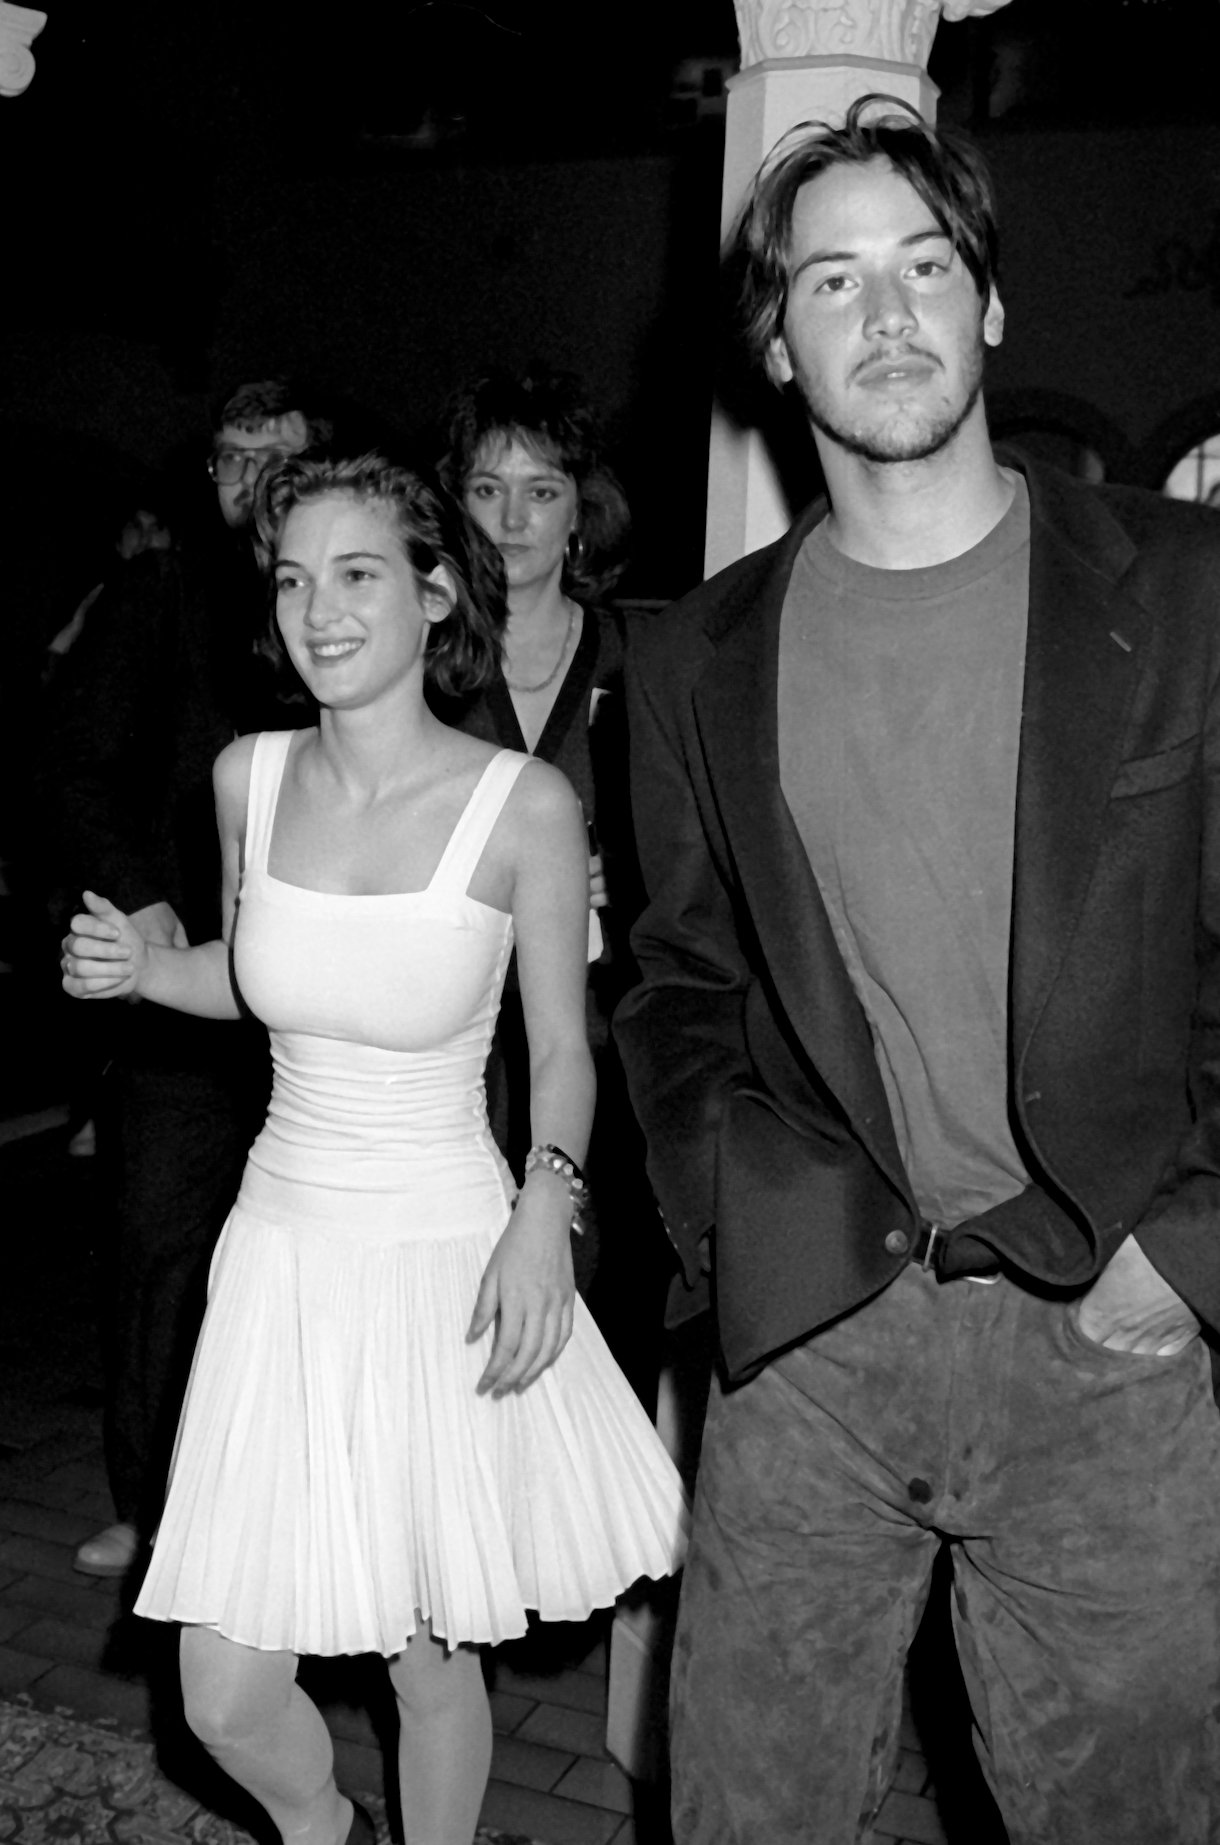 Winona Ryder and Keanu Reeves attend Fourth Annual Independent Spirit Awards in 1989